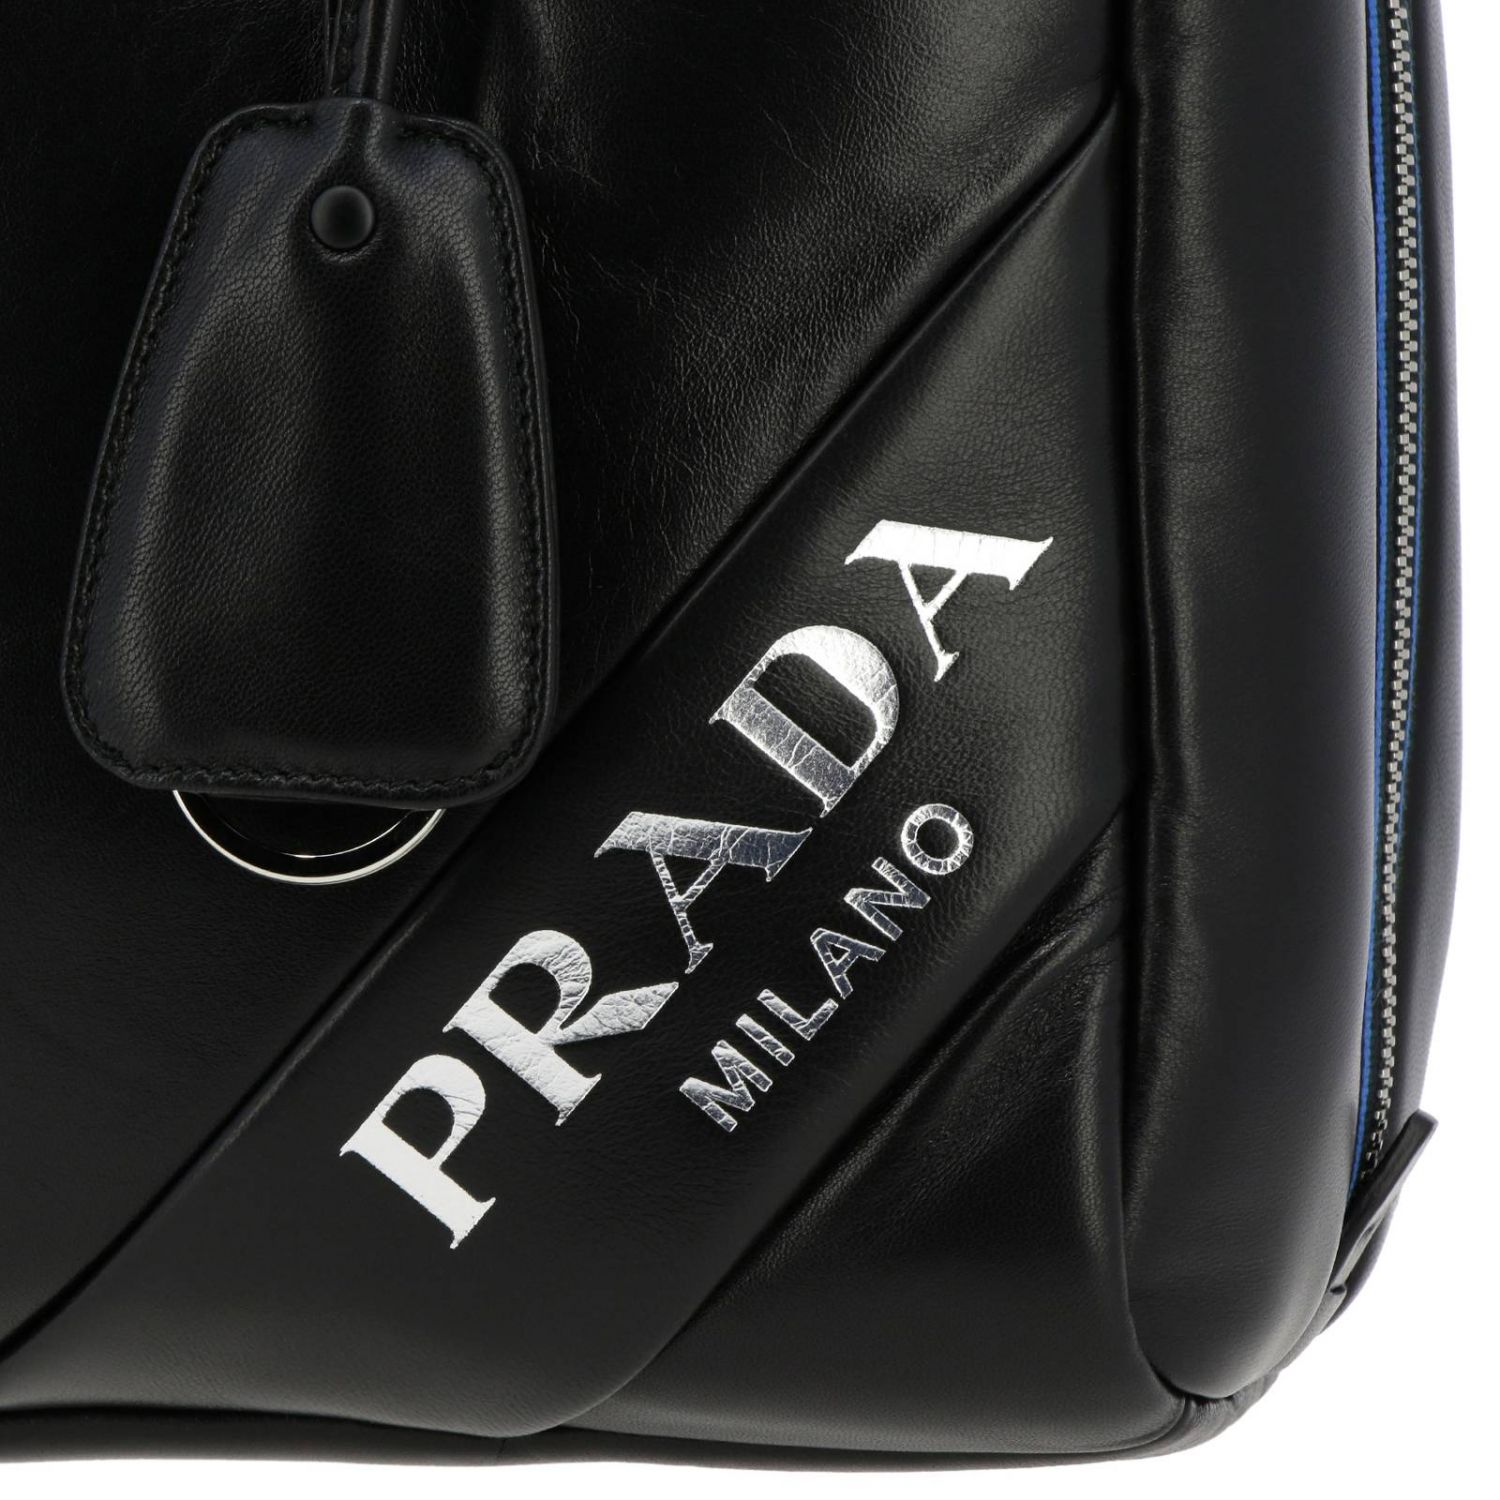 PRADA: Soft shopper bag in genuine leather with contrasting maxi ...